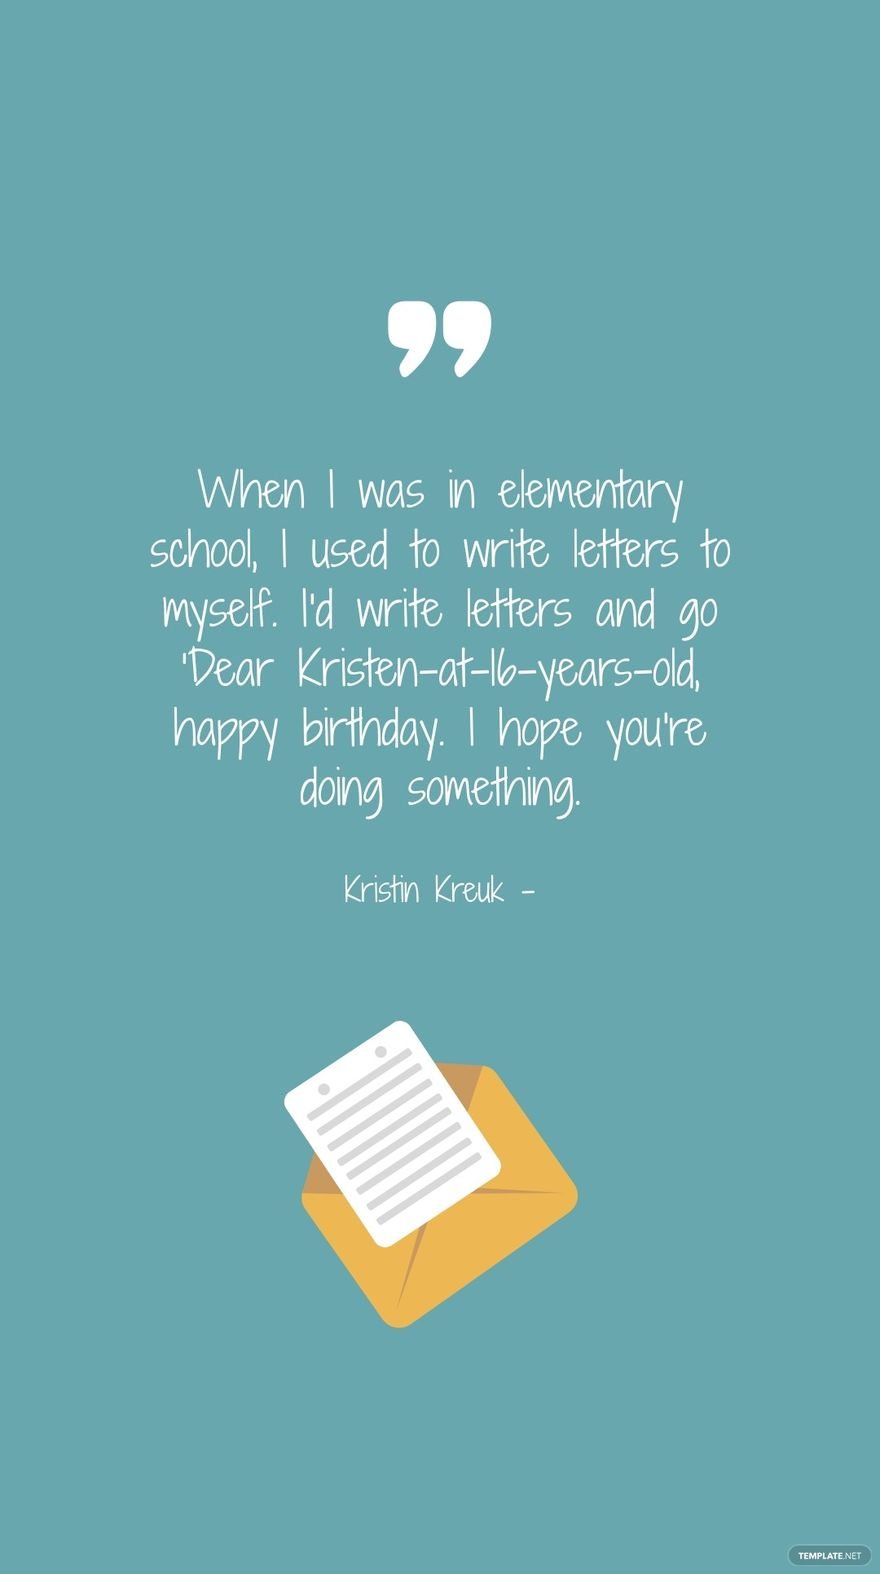 Free Kristin Kreuk - When I was in elementary school, I used to write letters to myself. I'd write letters and go 'Dear Kristen-at-16-years-old, happy birthday. I hope you're doing something.